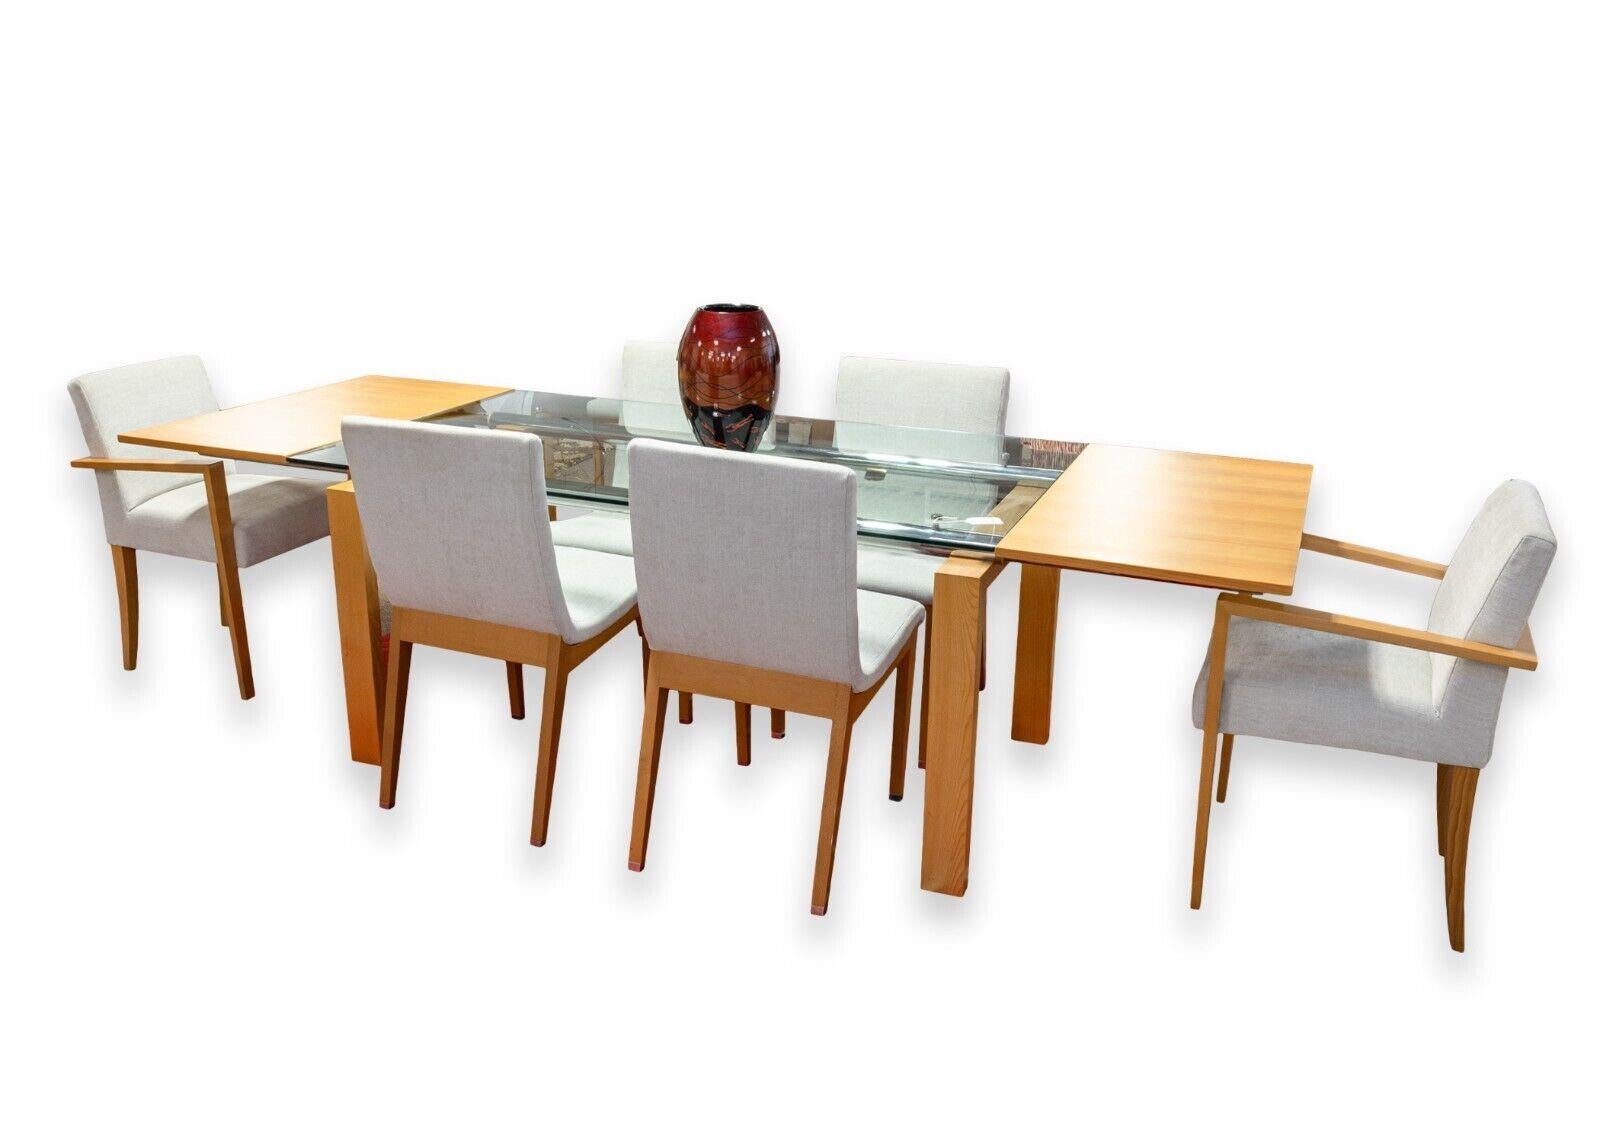 A set of 8 Ligne Roset dining chairs. A beautiful, modern set of dining chairs dawning a sleek grey upholstery and constructed with a light beech wood frame. This set includes 2 arm chairs and 6 side chairs. The arm chairs feature a wonderful